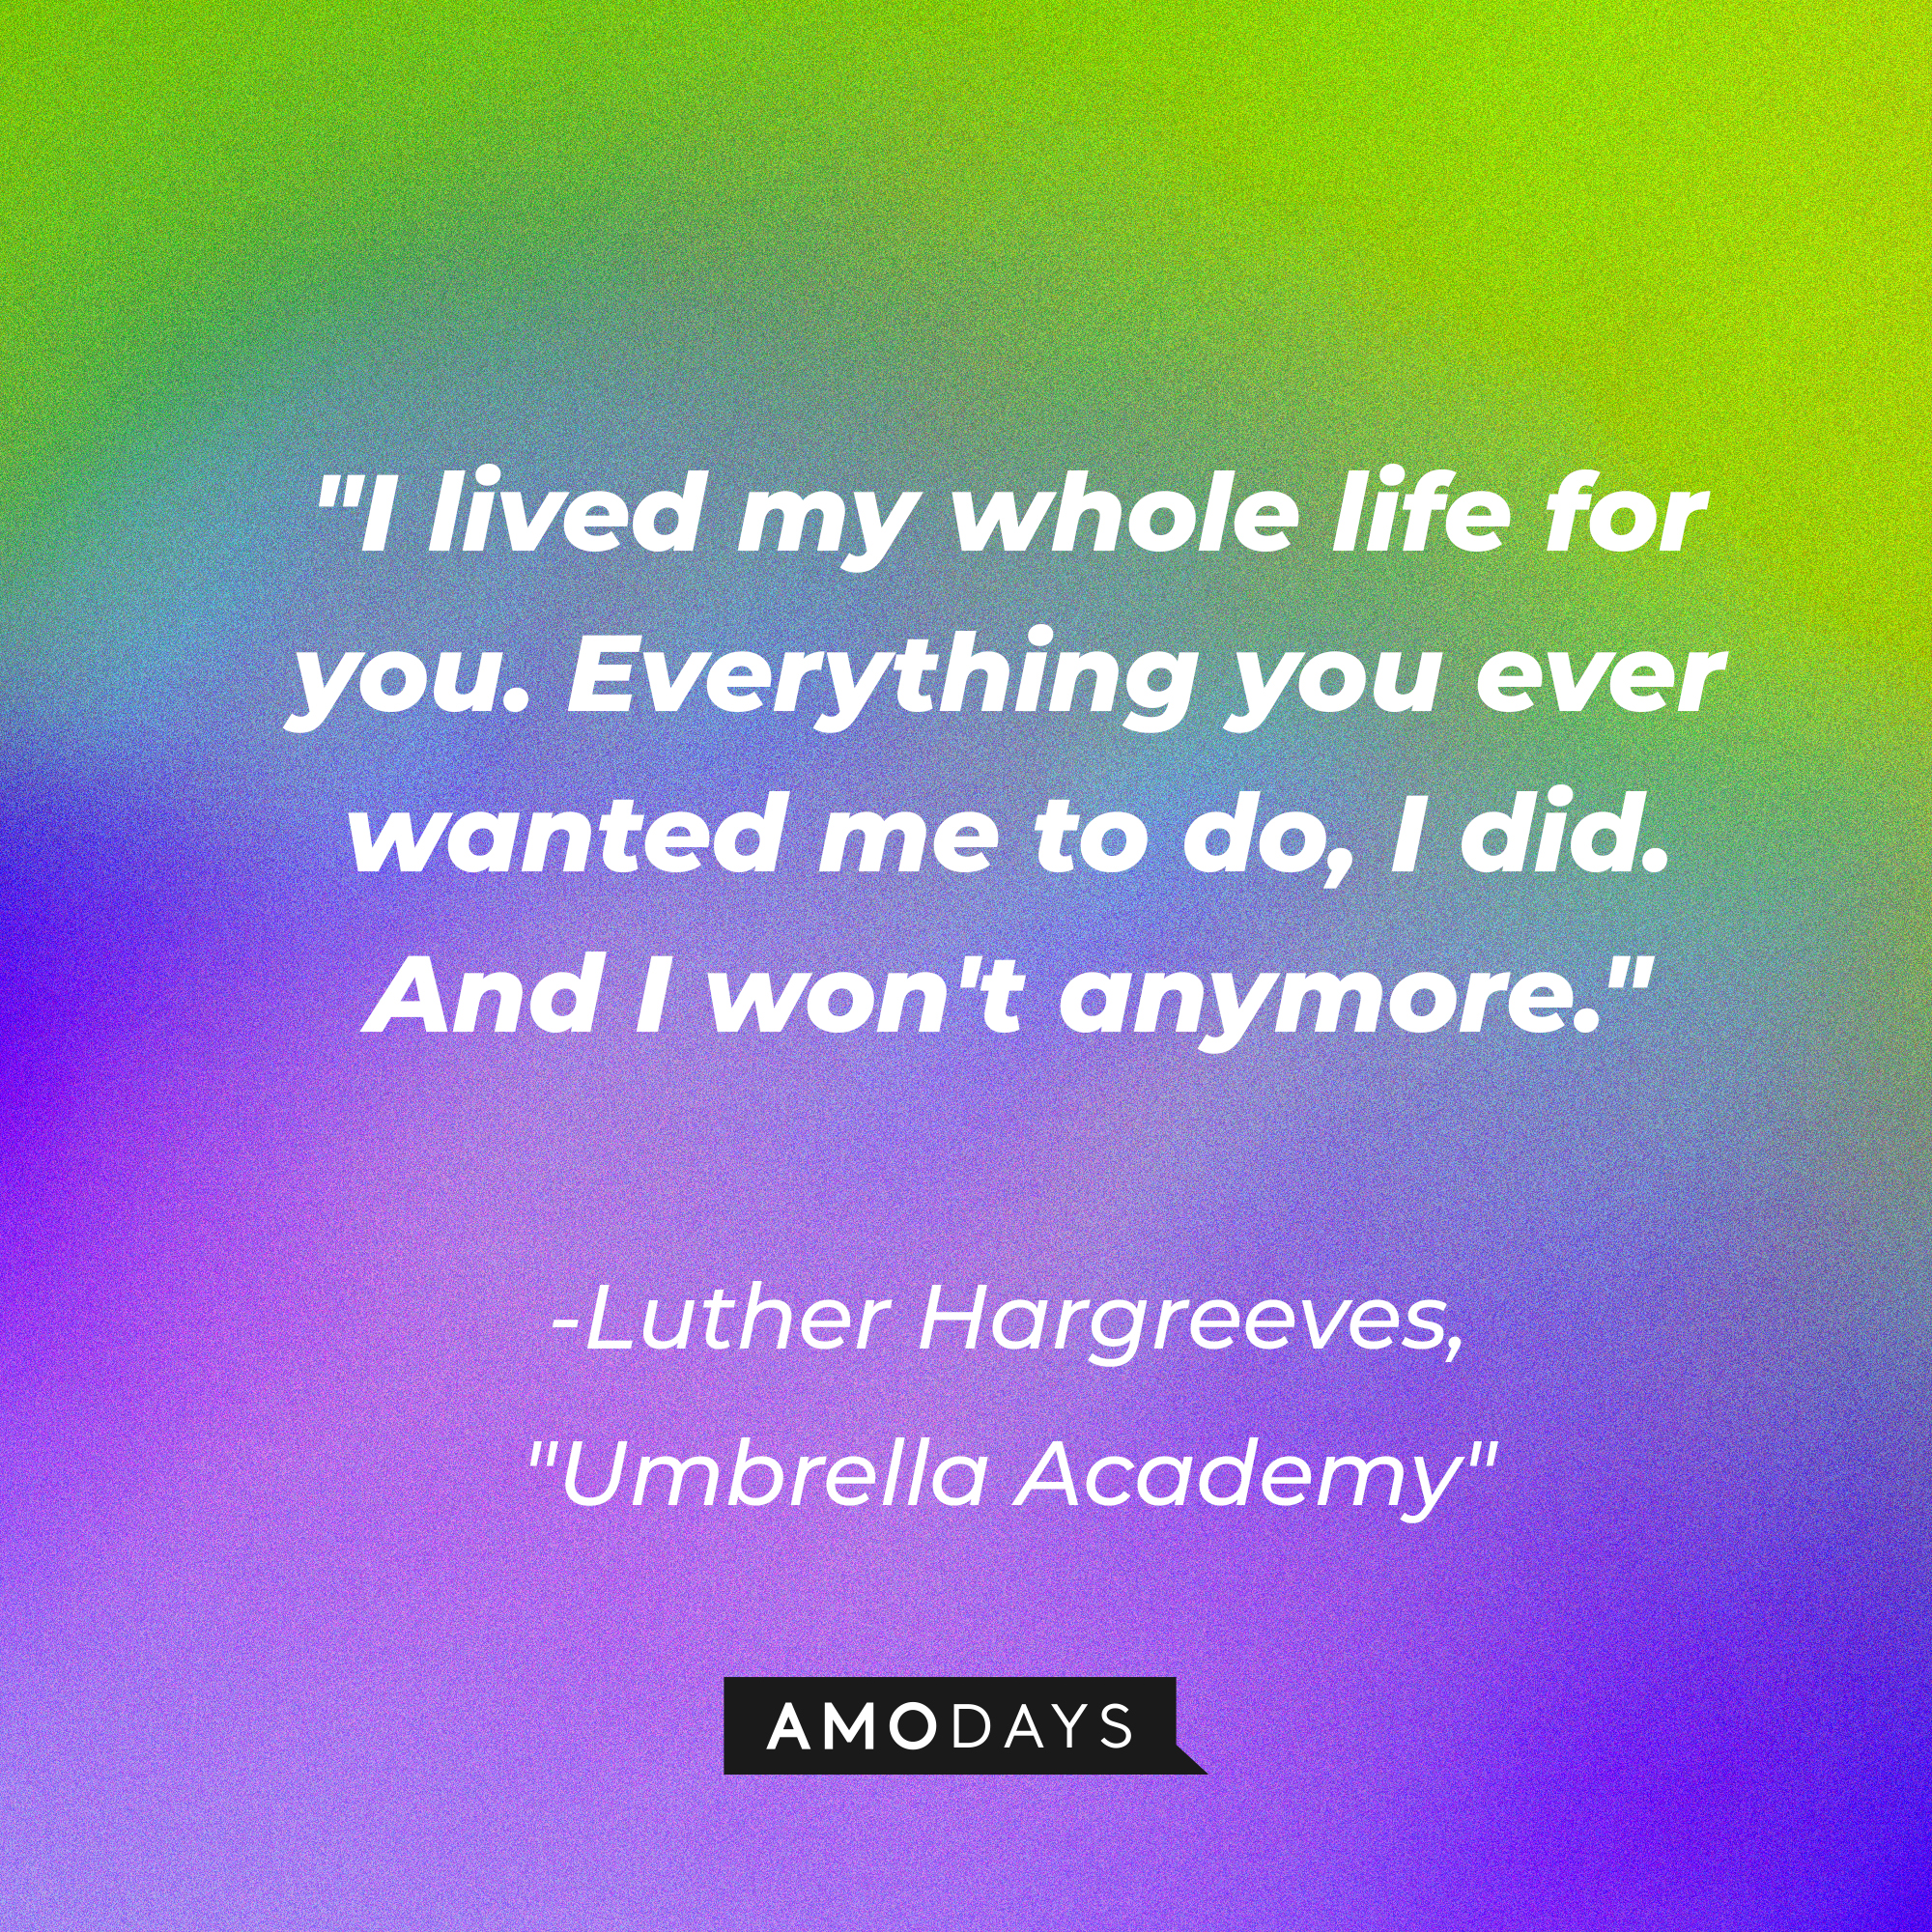 Luther Hargreeves' quote in "The Umbrella Academy:" "I lived my whole life for you. Everything you ever wanted me to do, I did. And I won't anymore." | Source: AmoDays